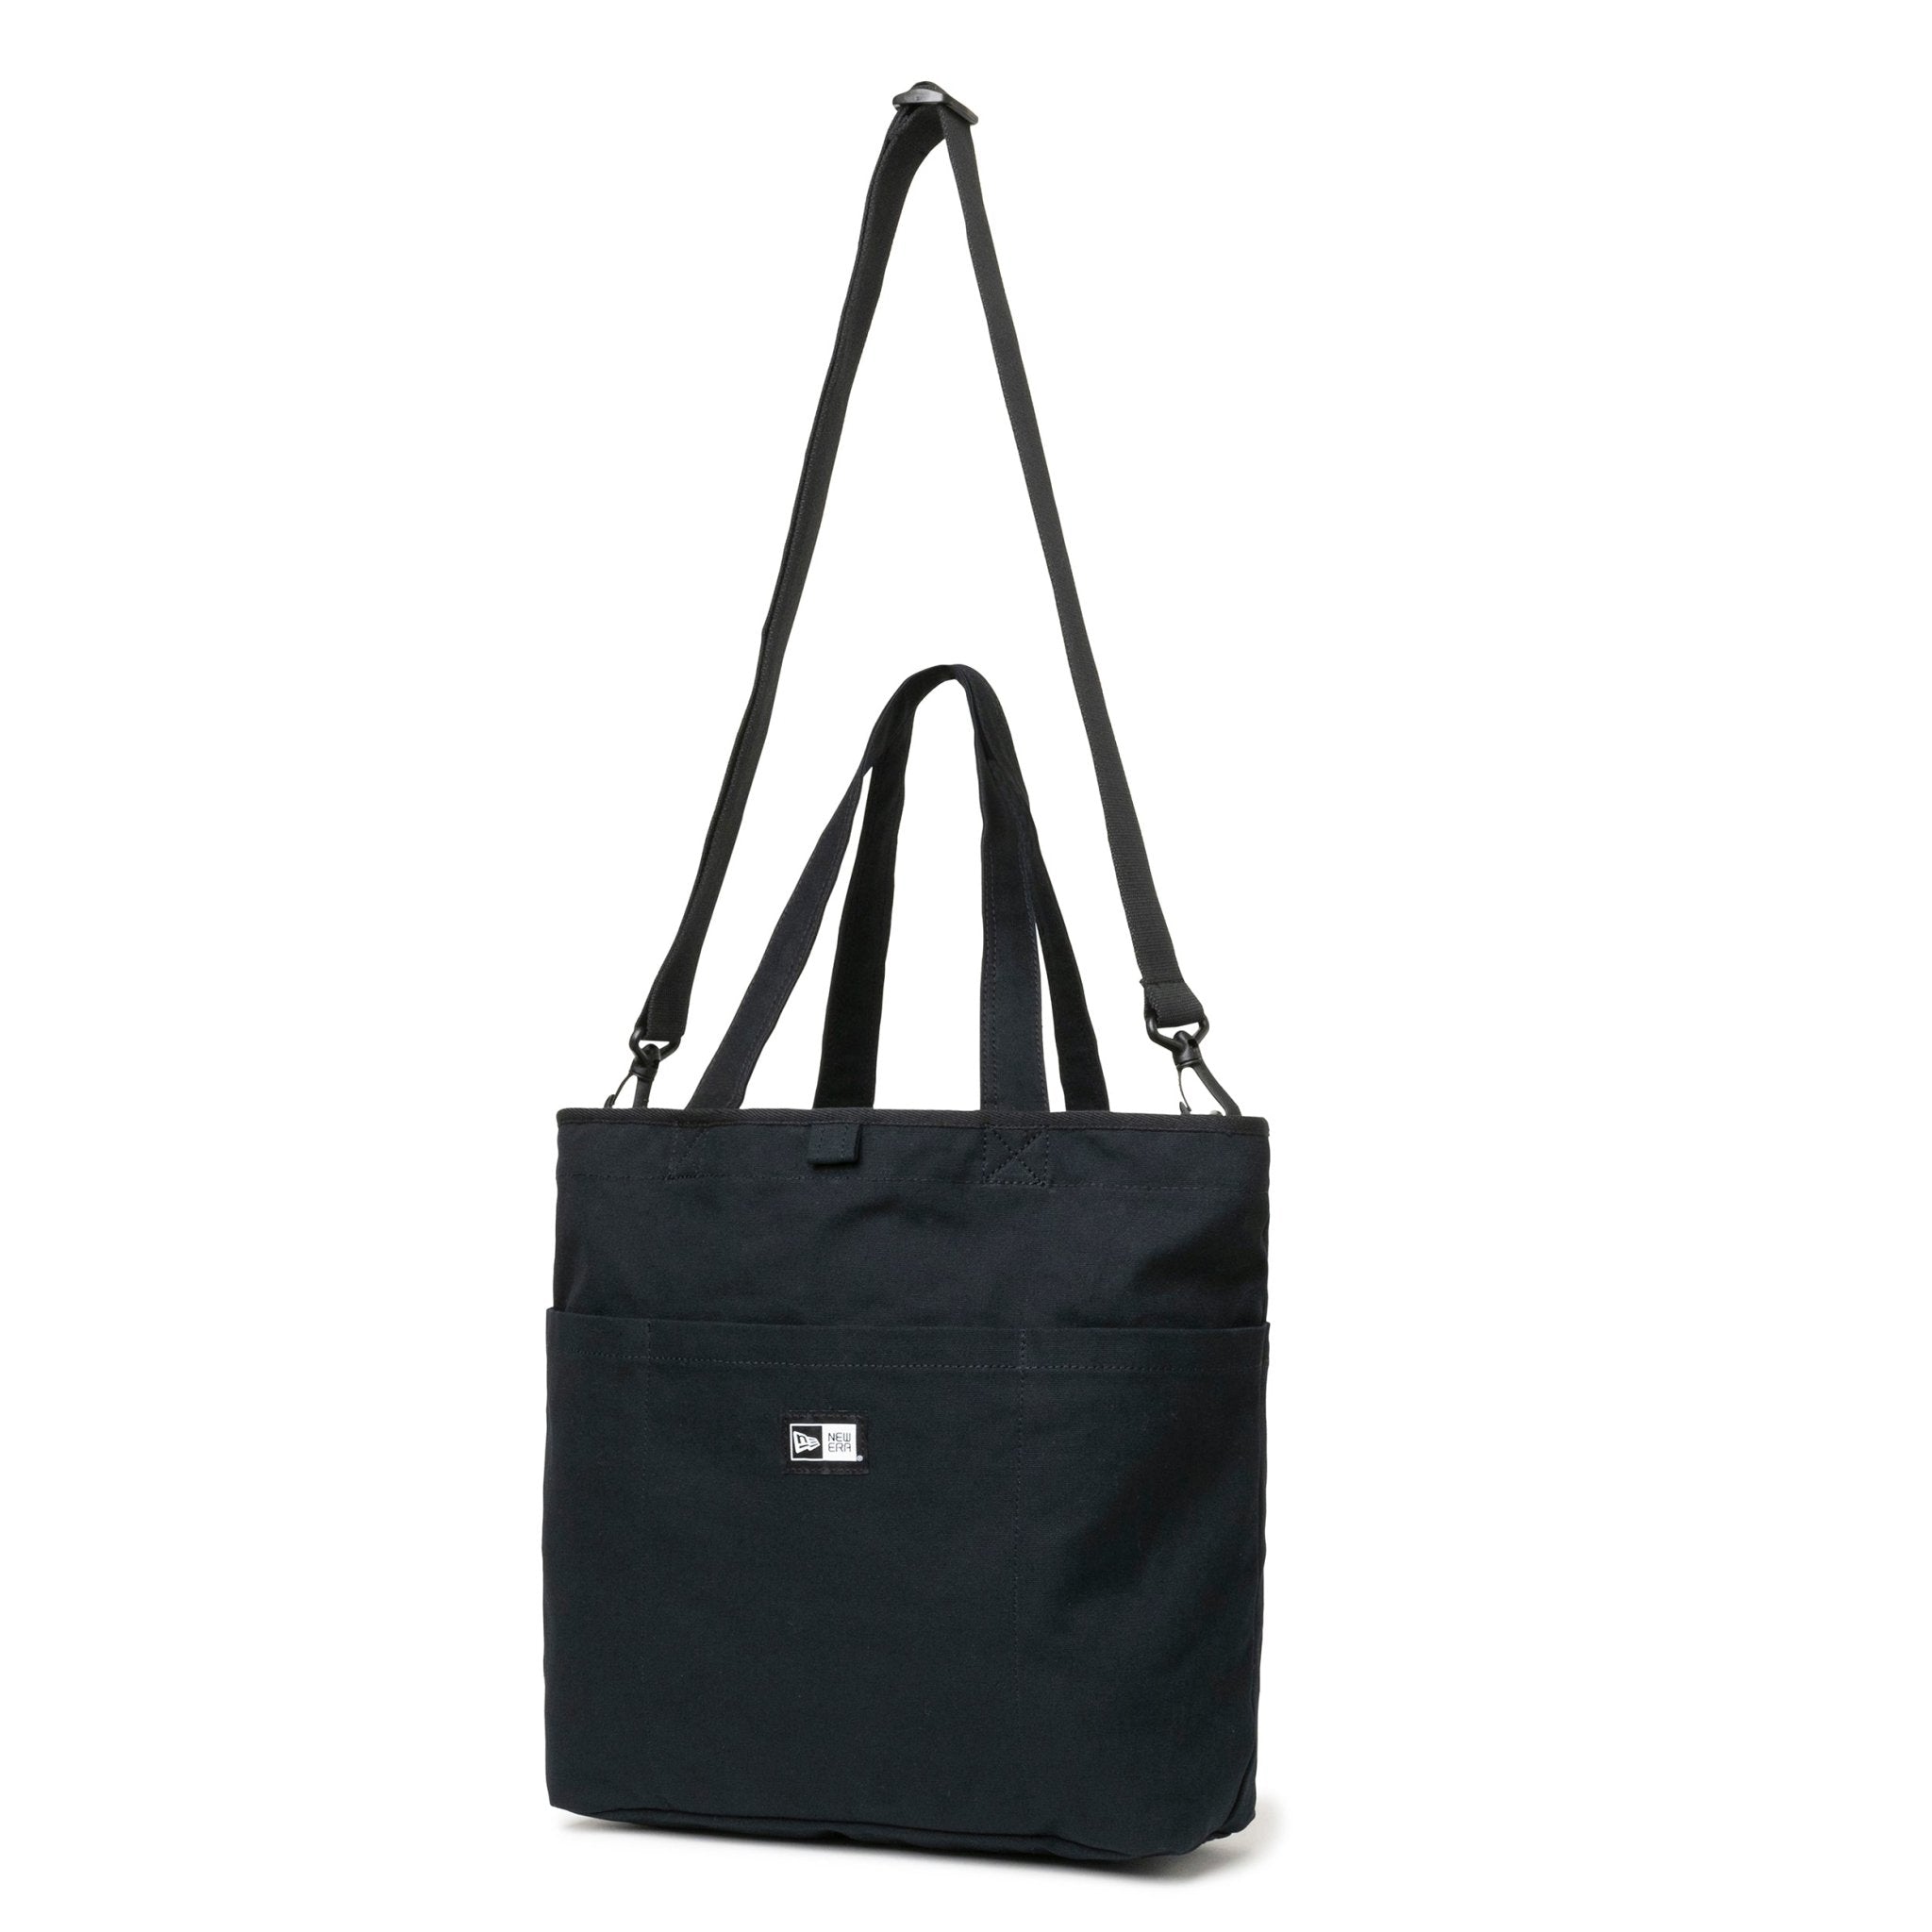 NEW ERA GYM TOTE BAG fcrb 23ss トートバッグ 1-